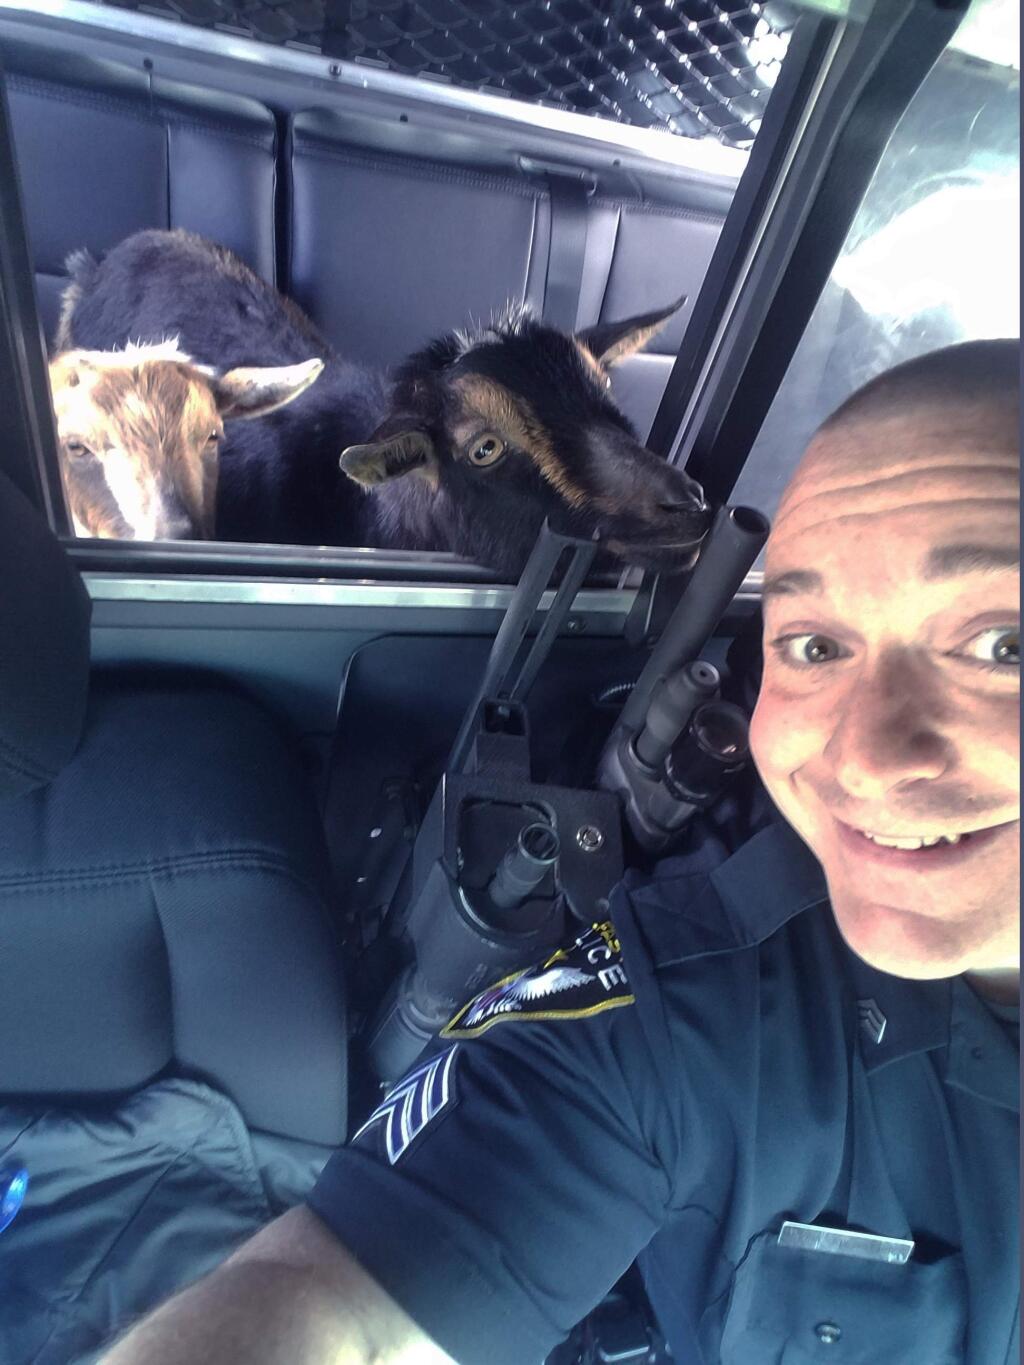 Sgt. Daniel Fitzpatrick of the Belfast Police Department in Belfast, Maine drives around with two lost goats in his police car on Sunday, April 23, 2017, looking for their owner. The goats were walking on a road in town and then entered a woman's garage before Fitzpatrick picked them up. The owner's daughter saw a police Facebook post about the lost goats and came down to the station to retrieve them. (Sgt. Daniel P. Fitzpatrick II/Belfast Police Department via AP)